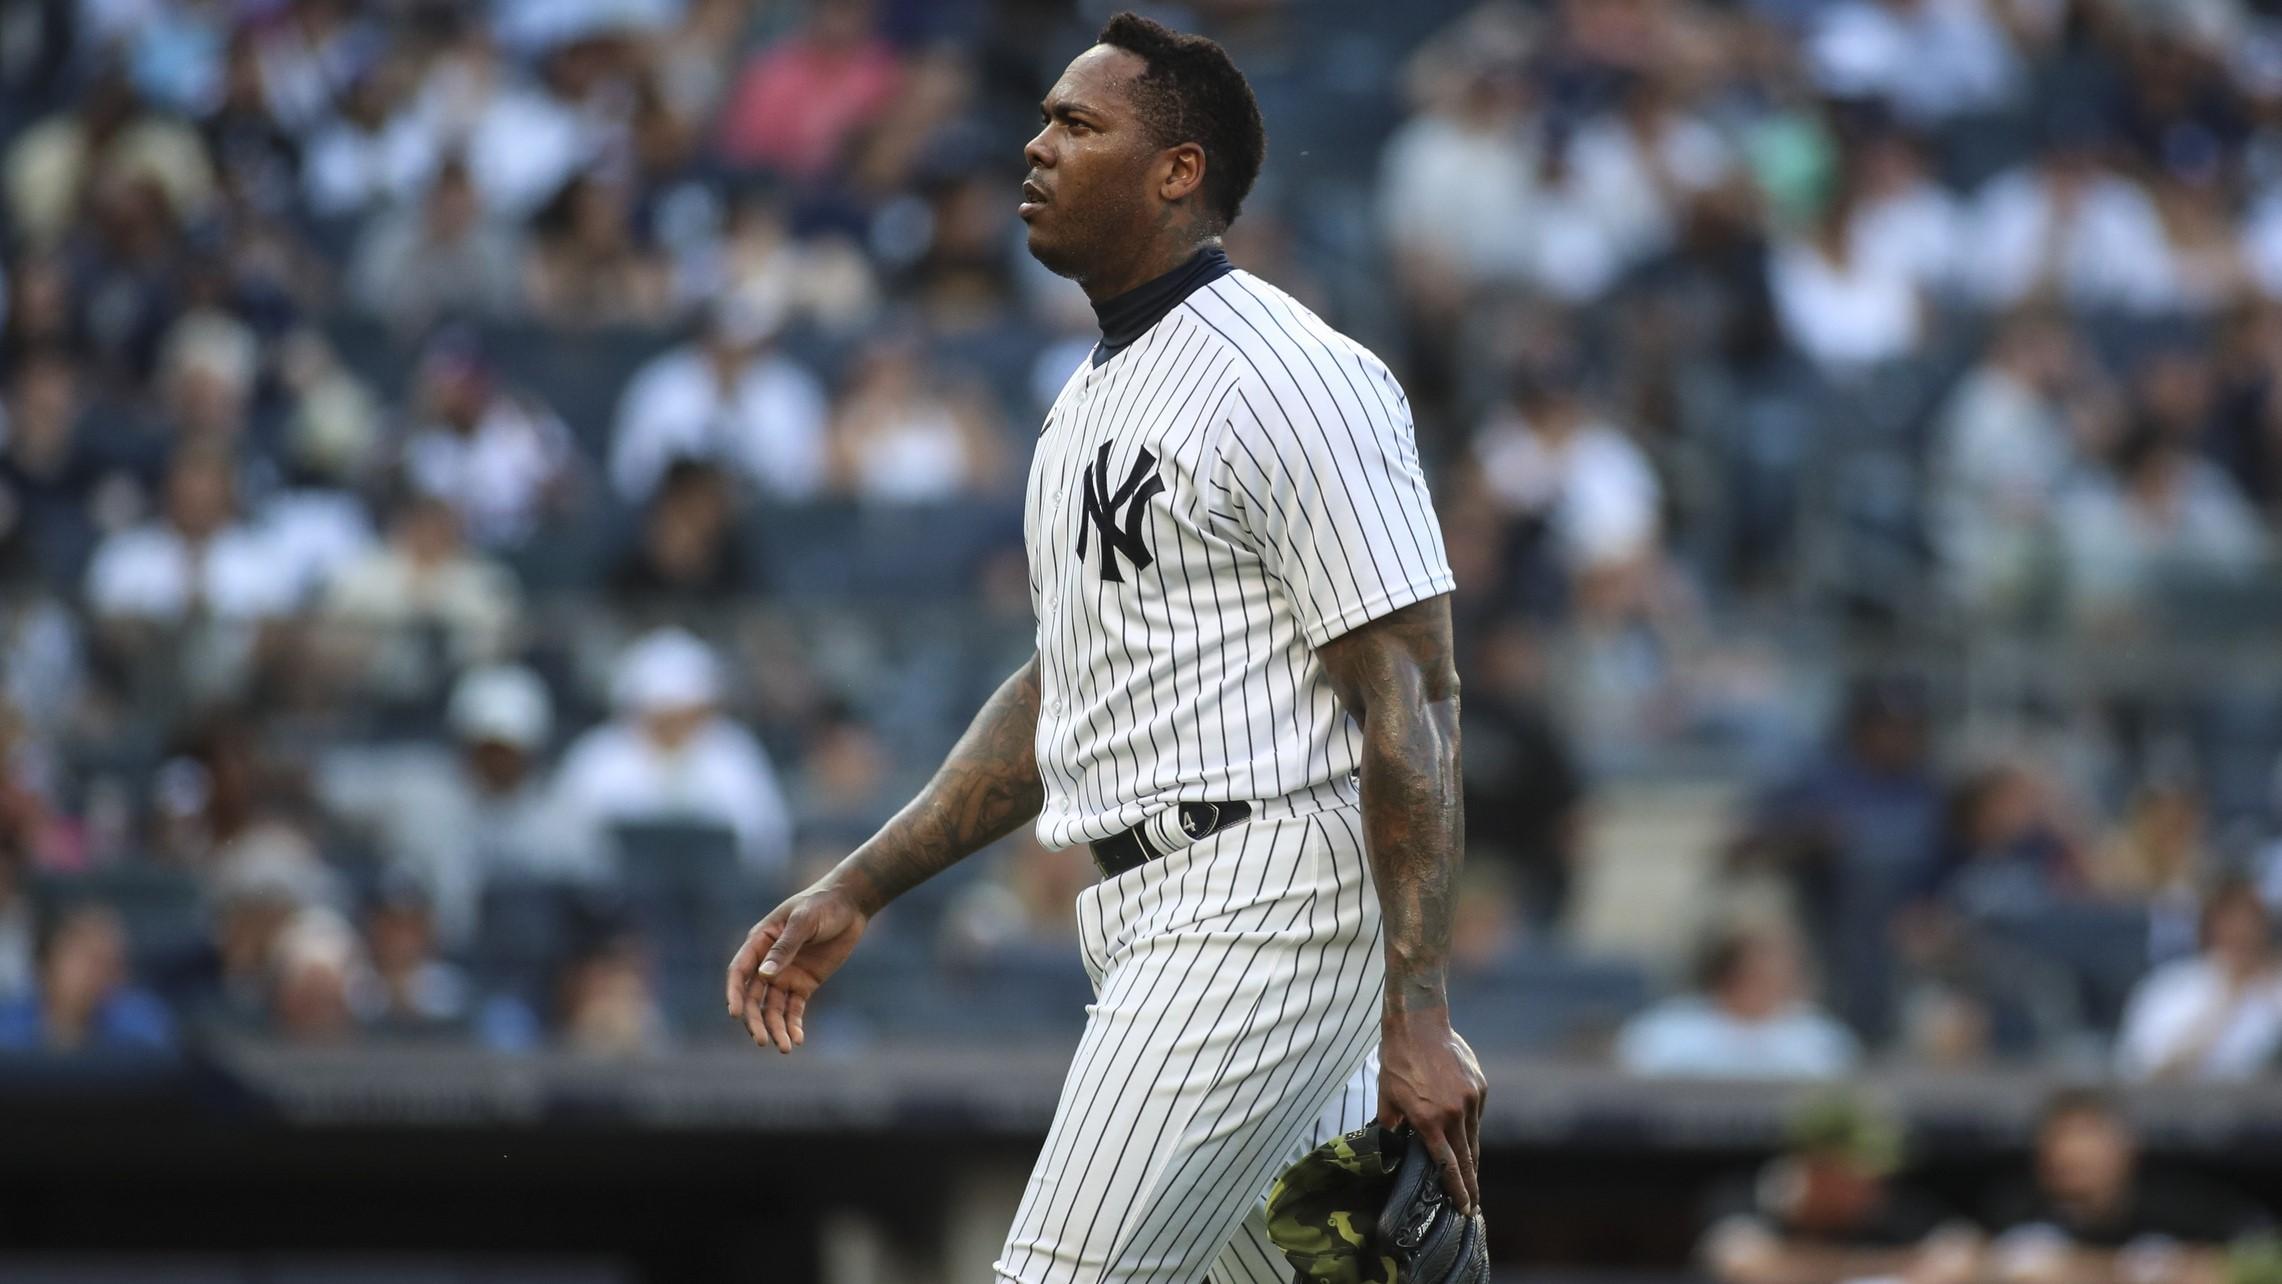 May 22, 2022; Bronx, New York, USA; New York Yankees relief pitcher Aroldis Chapman (54) walks off the mound in the ninth inning after blowing a save against the Chicago White Sox at Yankee Stadium. / Wendell Cruz-USA TODAY Sports